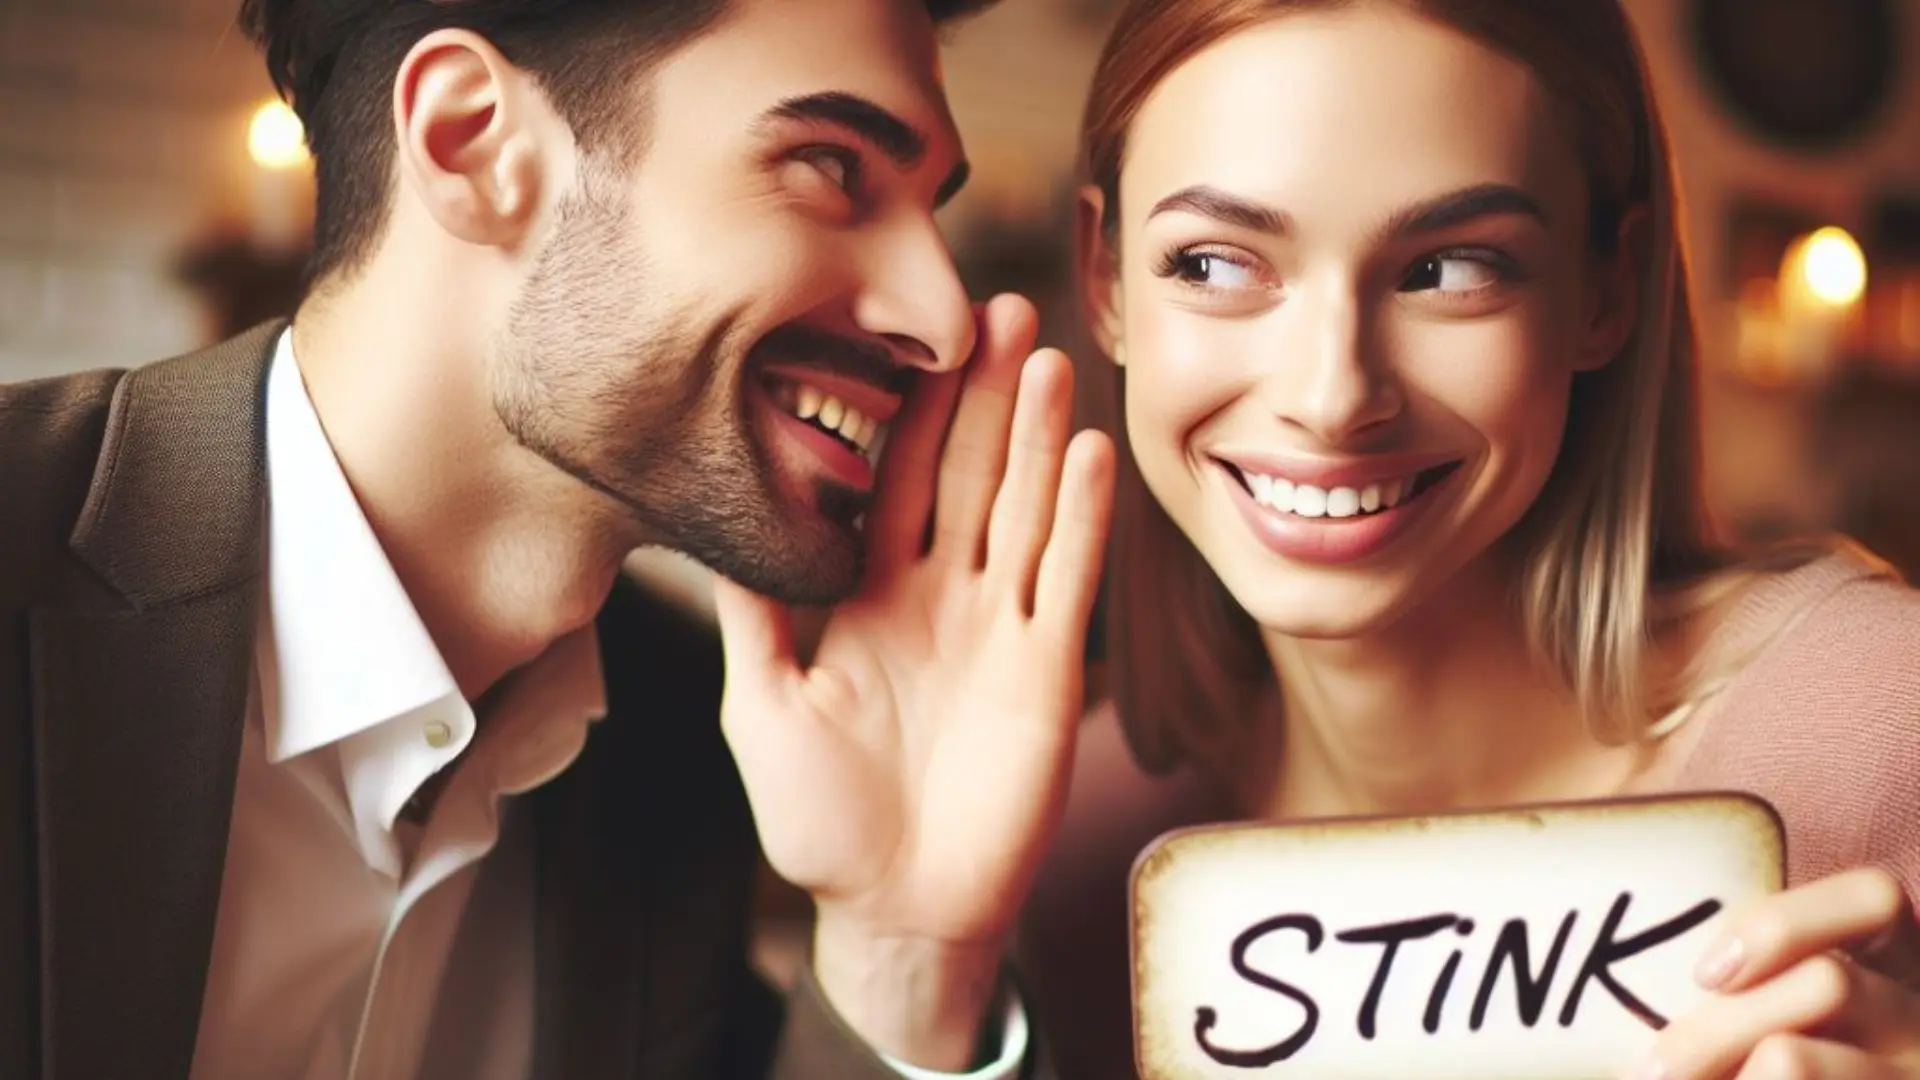 Curious about what it means when a guy calls you 'stink'? Witness a playful moment as a 30-year-old man teases his 25-year-old partner during a romantic dinner.